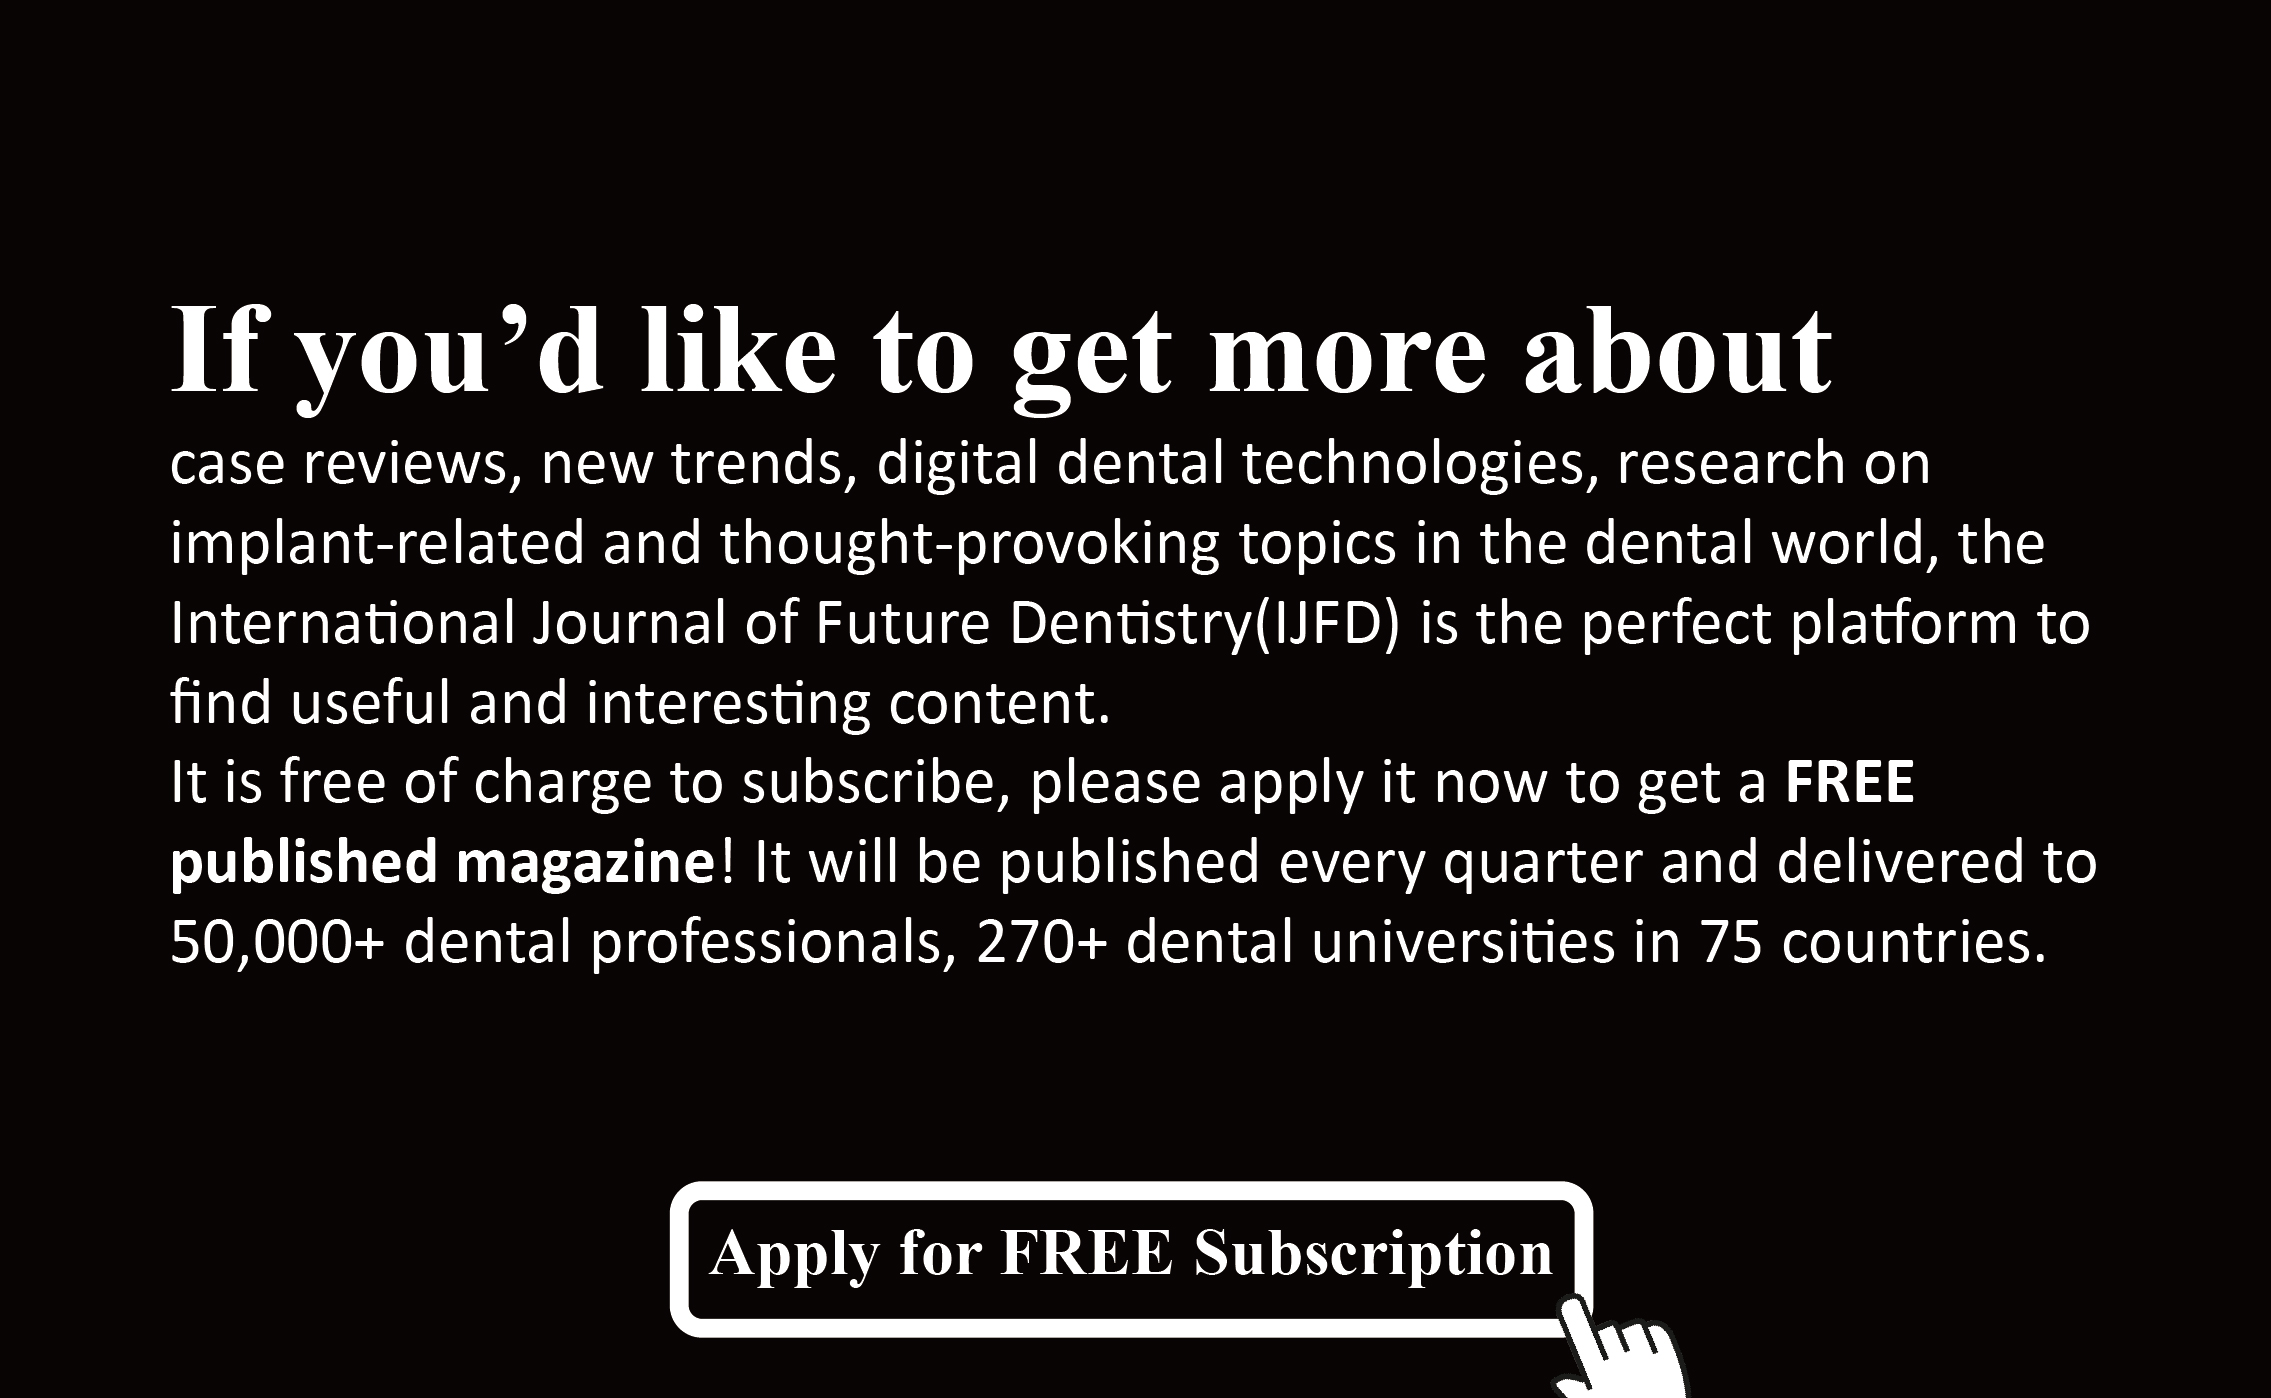 International Journal of Future Dentistry(IJFD). It is free of charge to subscribe, please apply it now to get a FREE published magazine! It will be published every quarter and delivered to 50,000+ dental professionals, 270+ dental universities in 75 countries. 